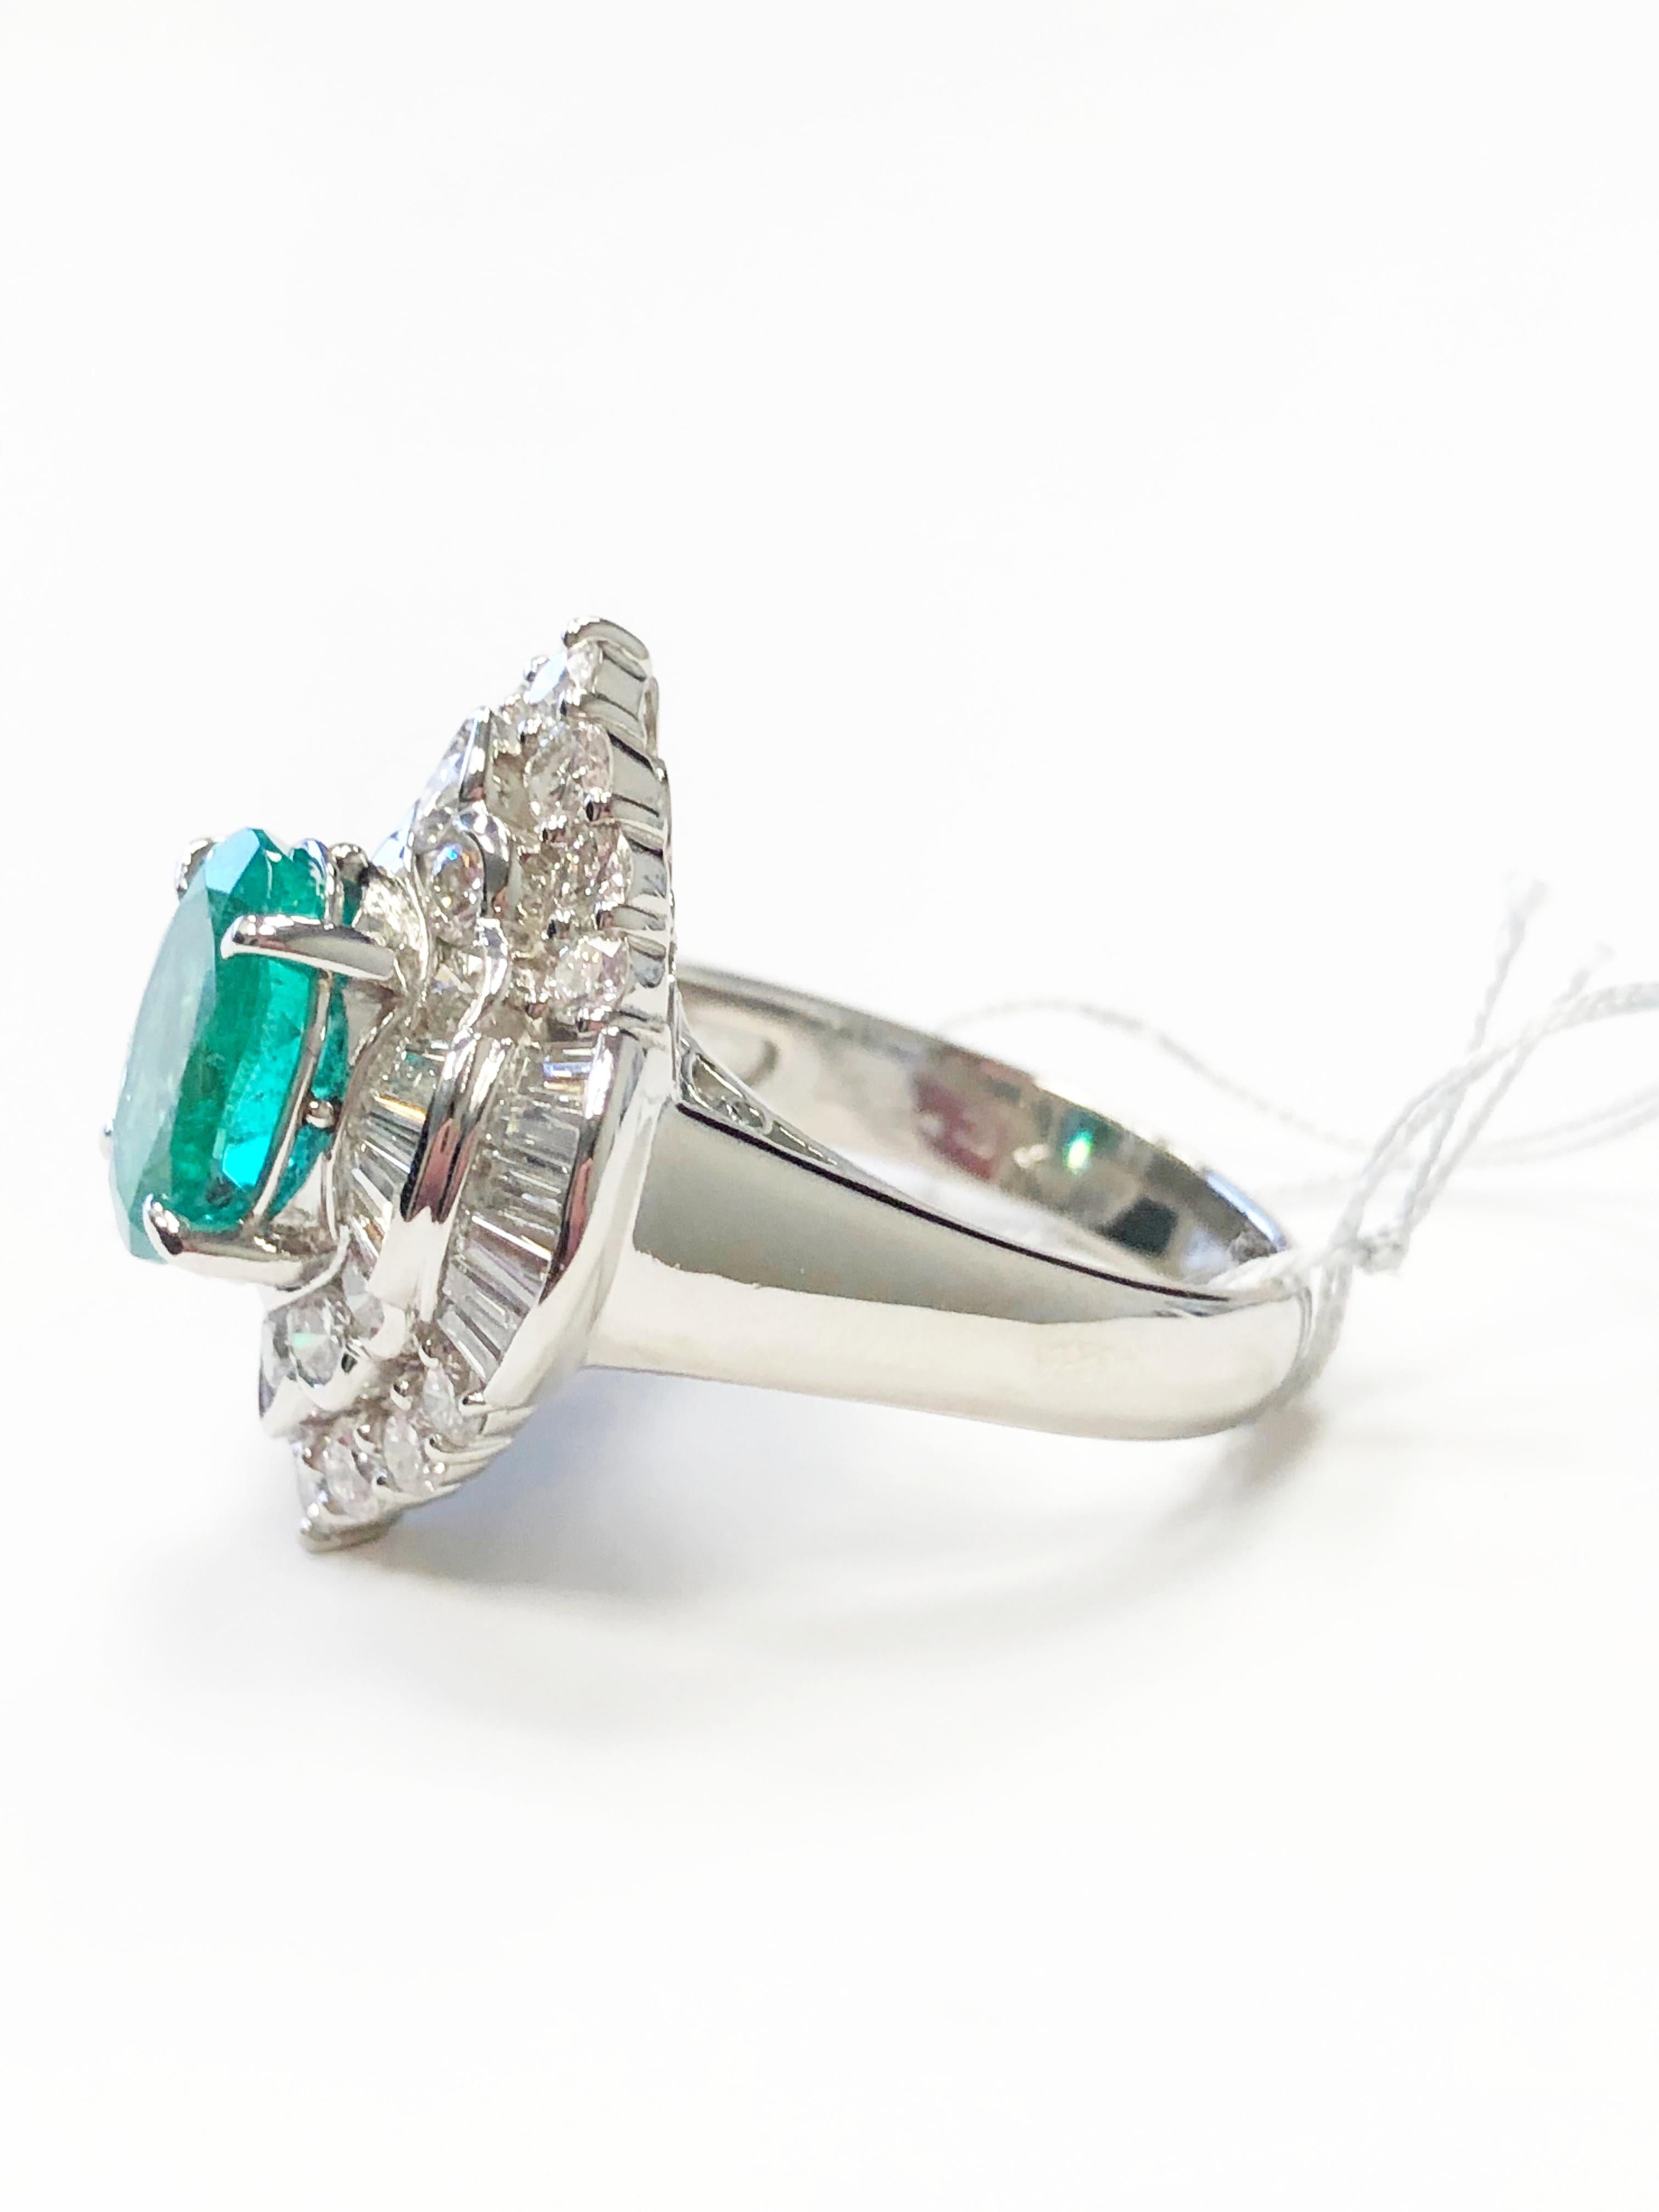 Women's or Men's Emerald Oval and White Diamond Cocktail Ring in Platinum